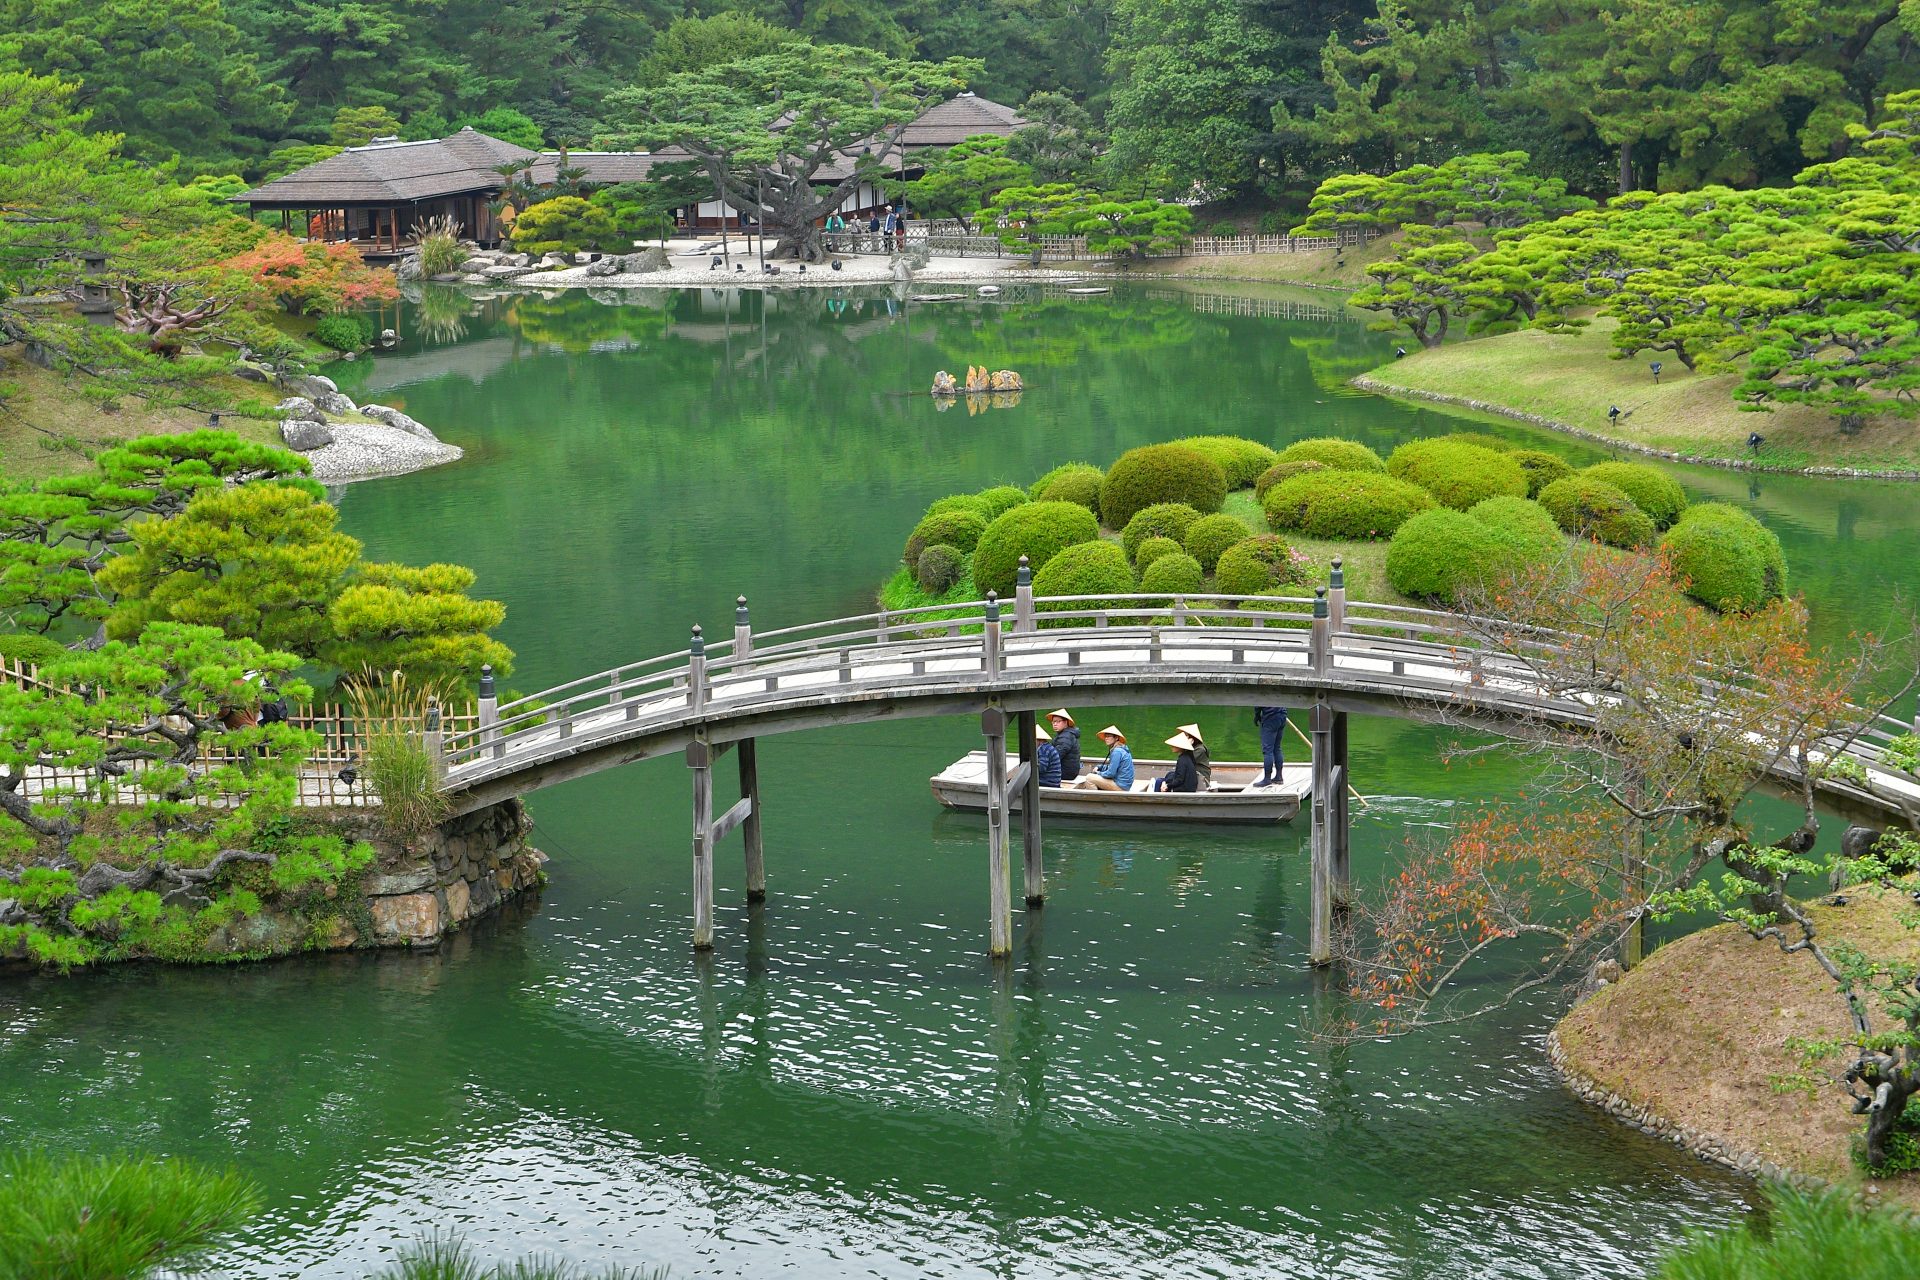 <p>This daimyo (feudal lord) garden was designed to be admired while strolling around. It's considered a special scenic spot in Japanese culture.</p>